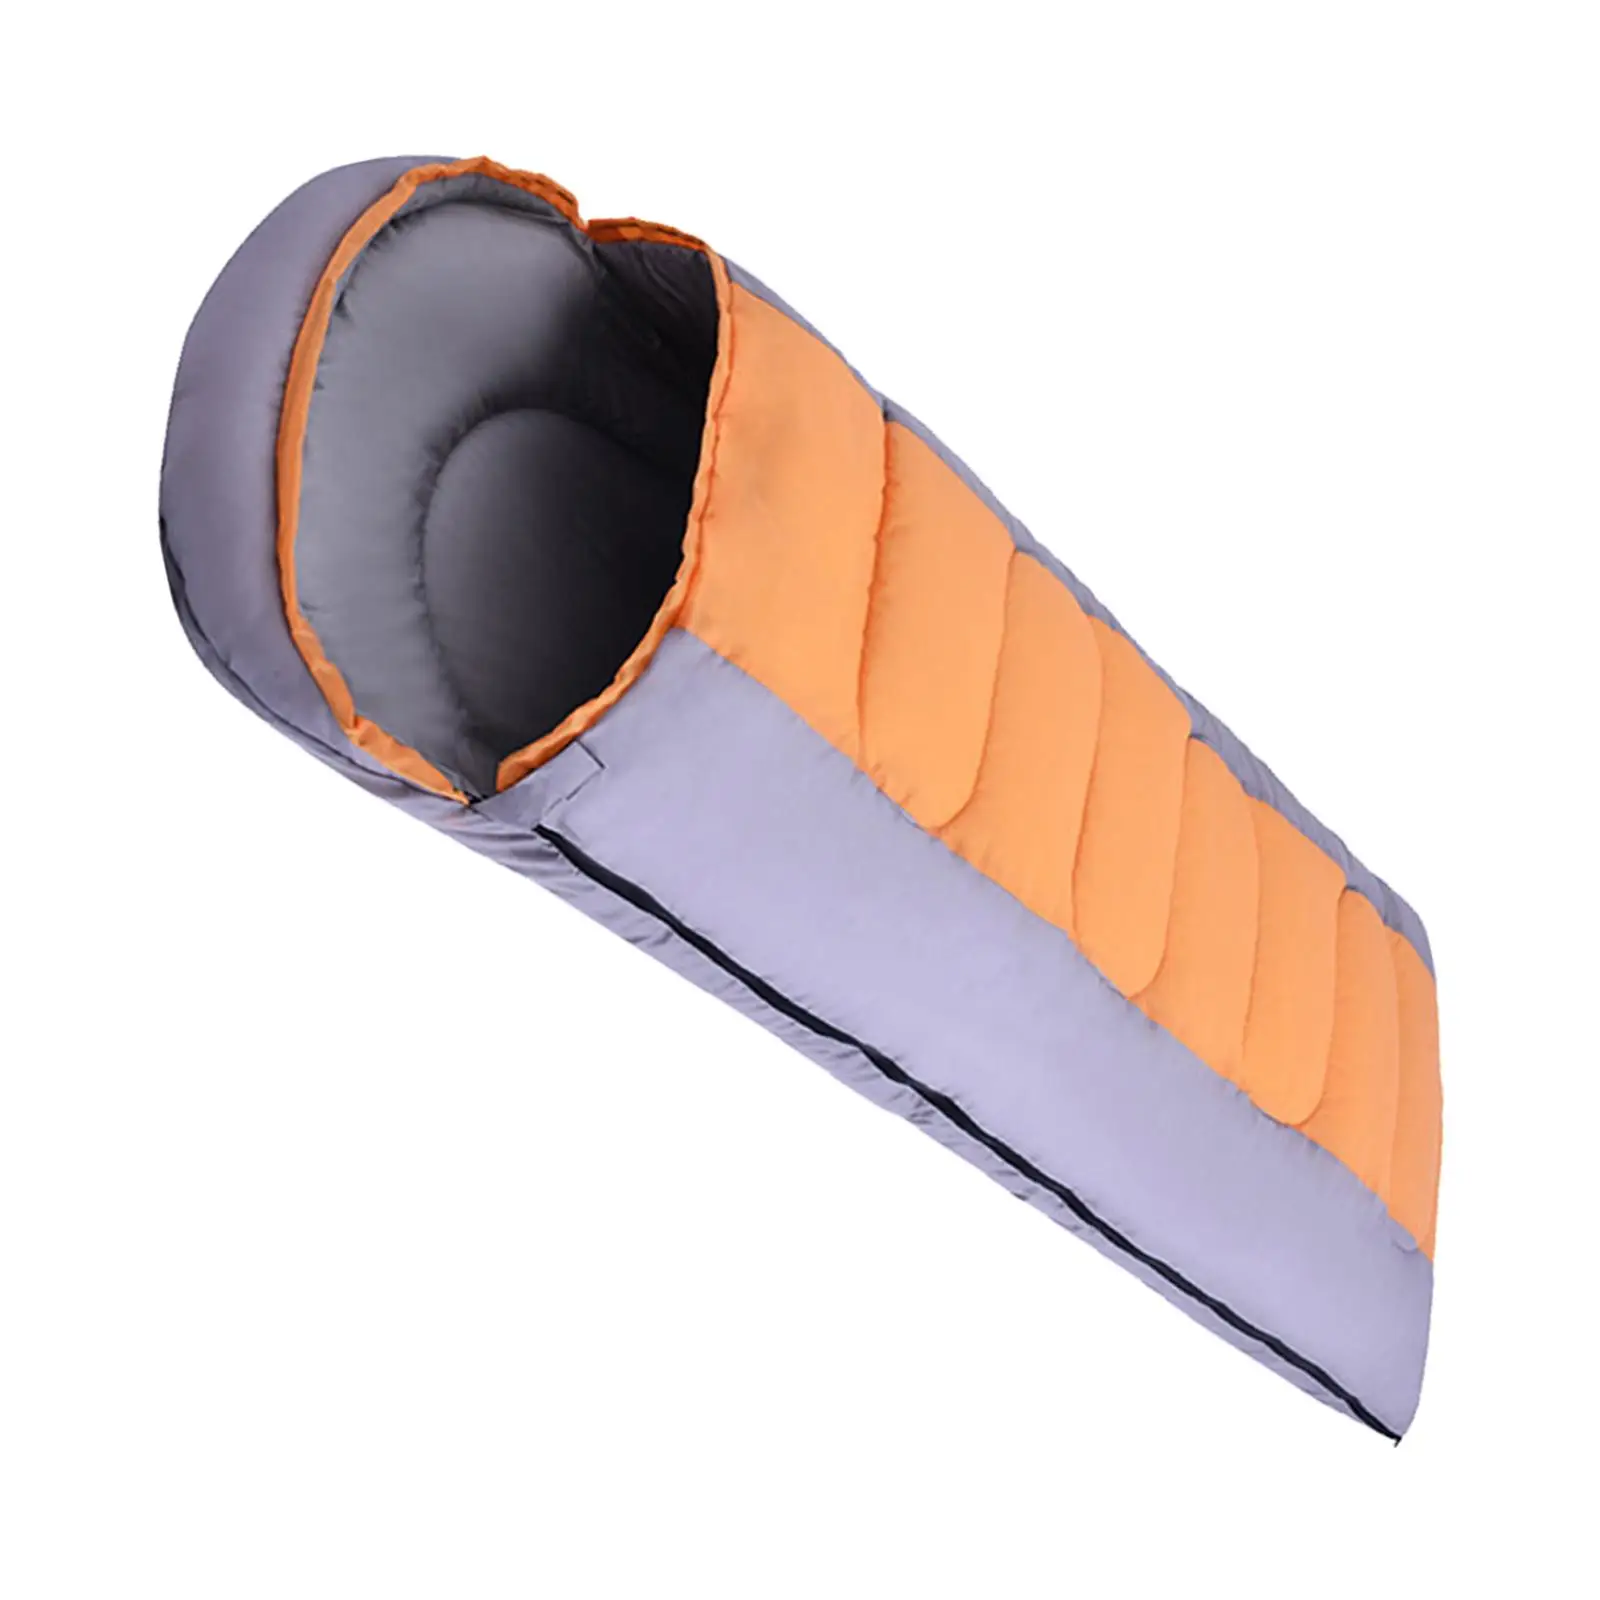 Sleeping Bag Liner Zippered Holes for Feet for Hiking Youth 